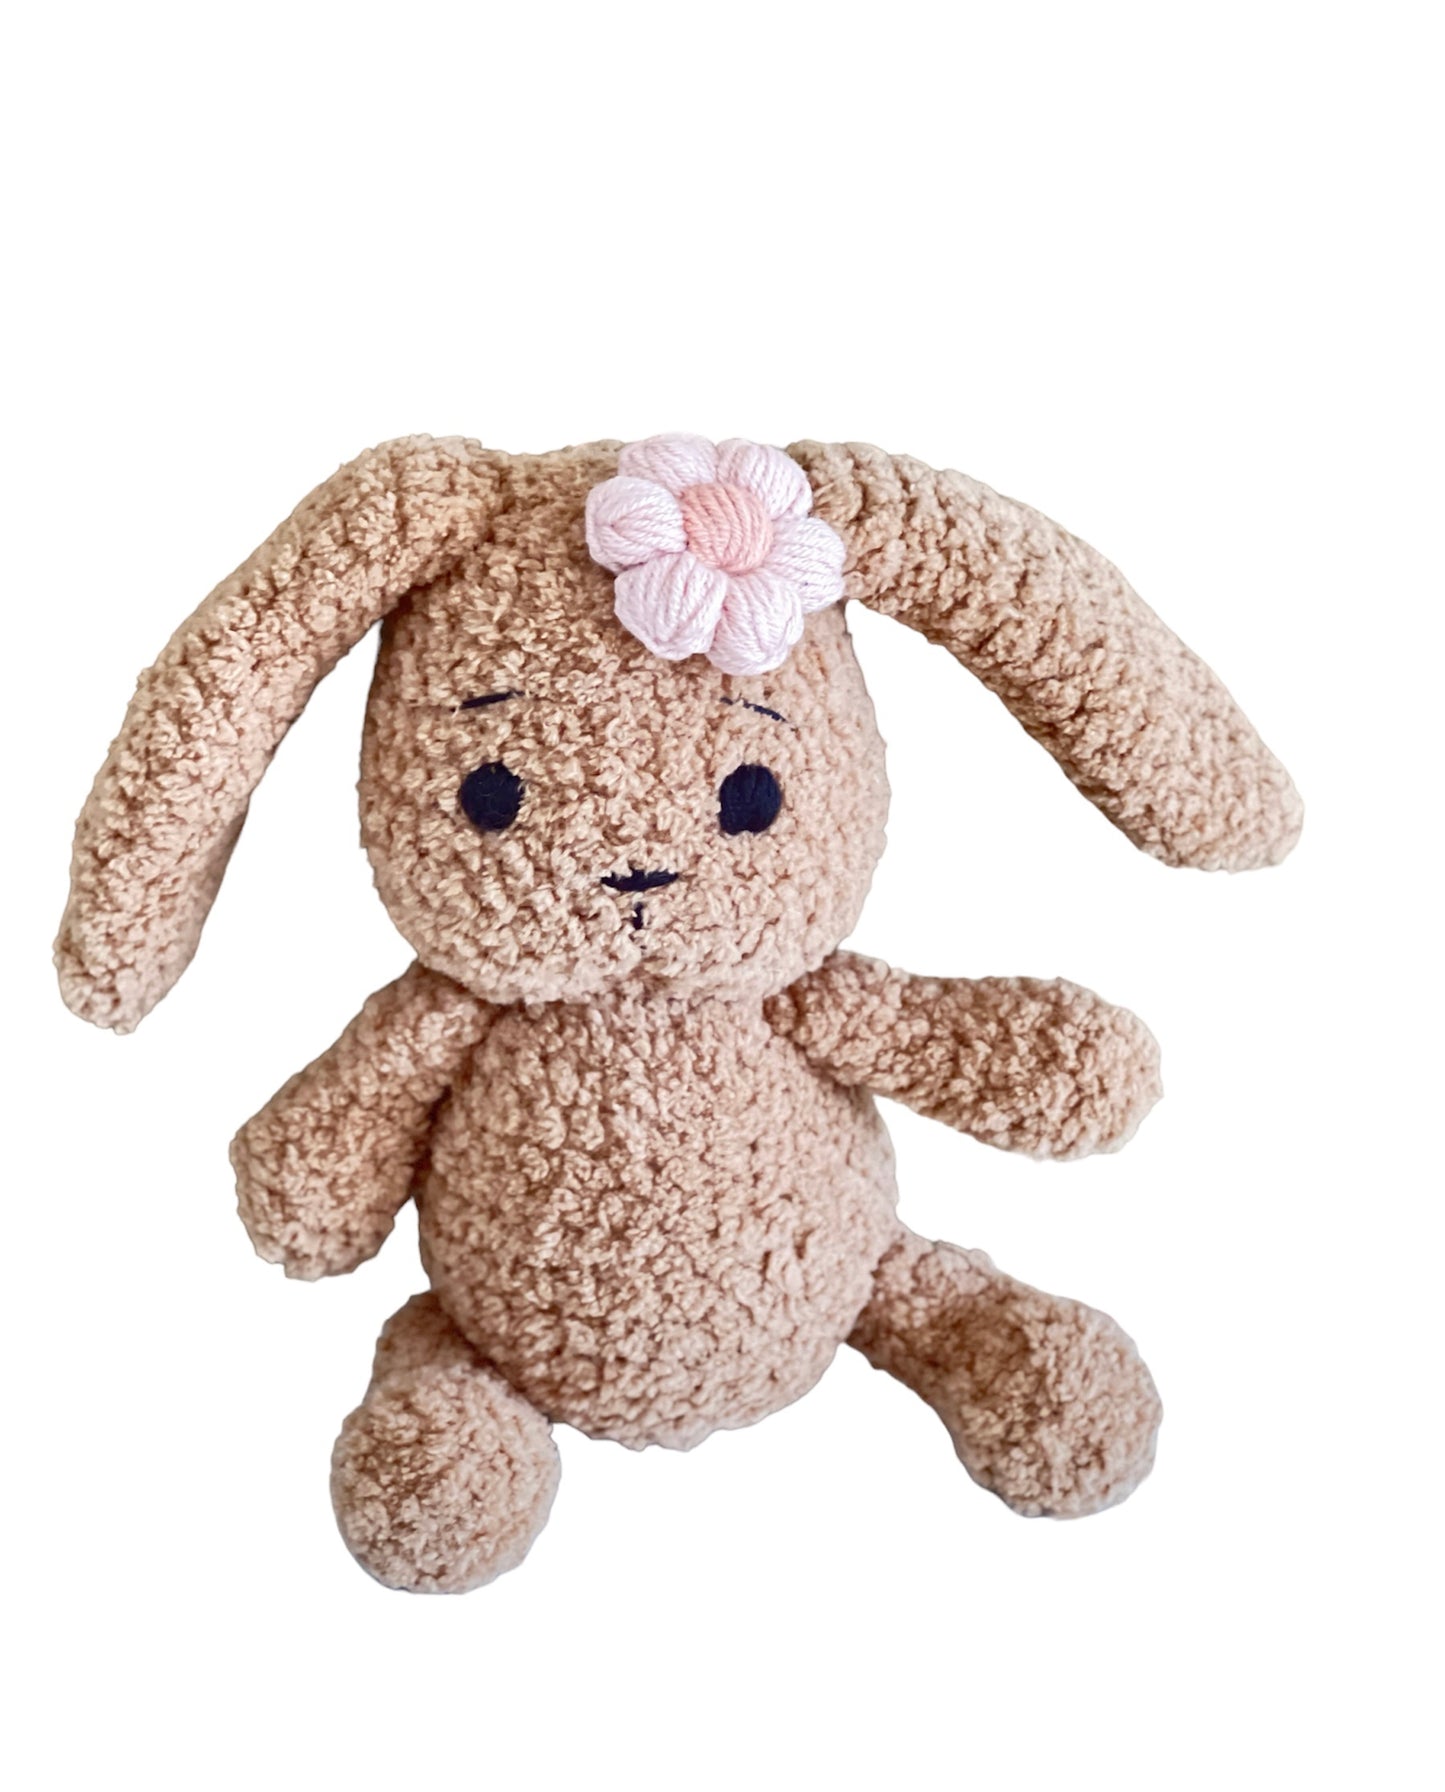 Bunny Doll, Stuffed Animal, Crochet Bunny Rabbit, Baby Gift, Eyes closed, Gift for Kid, Gift for toddler, Easter gift, Bunnies